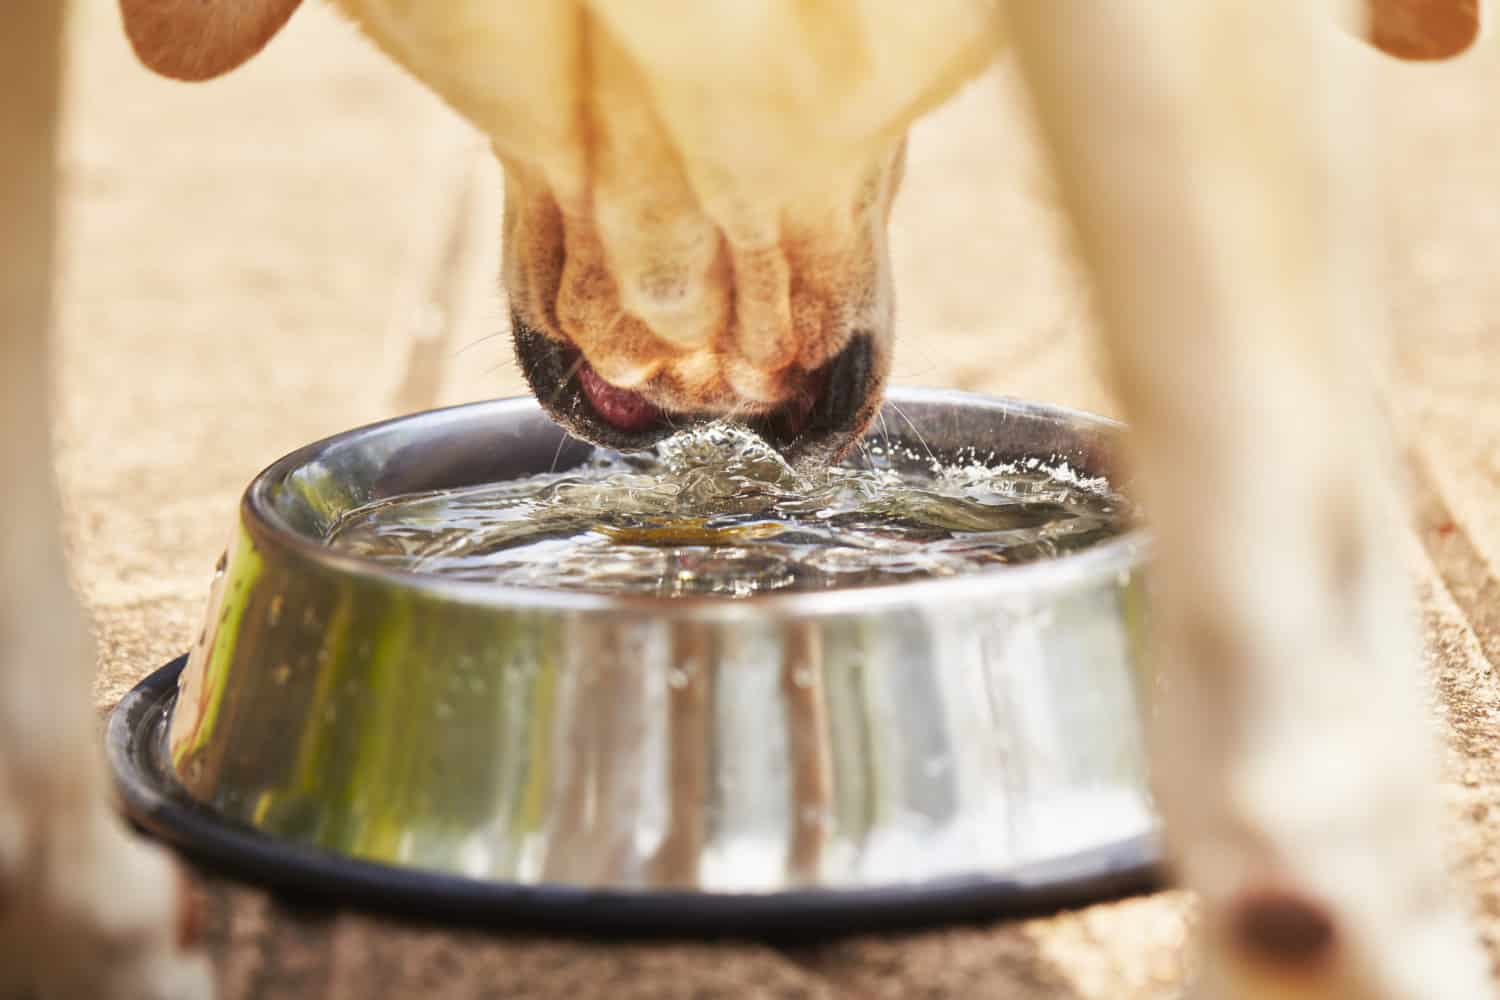 A dog drinks from a bowl of water